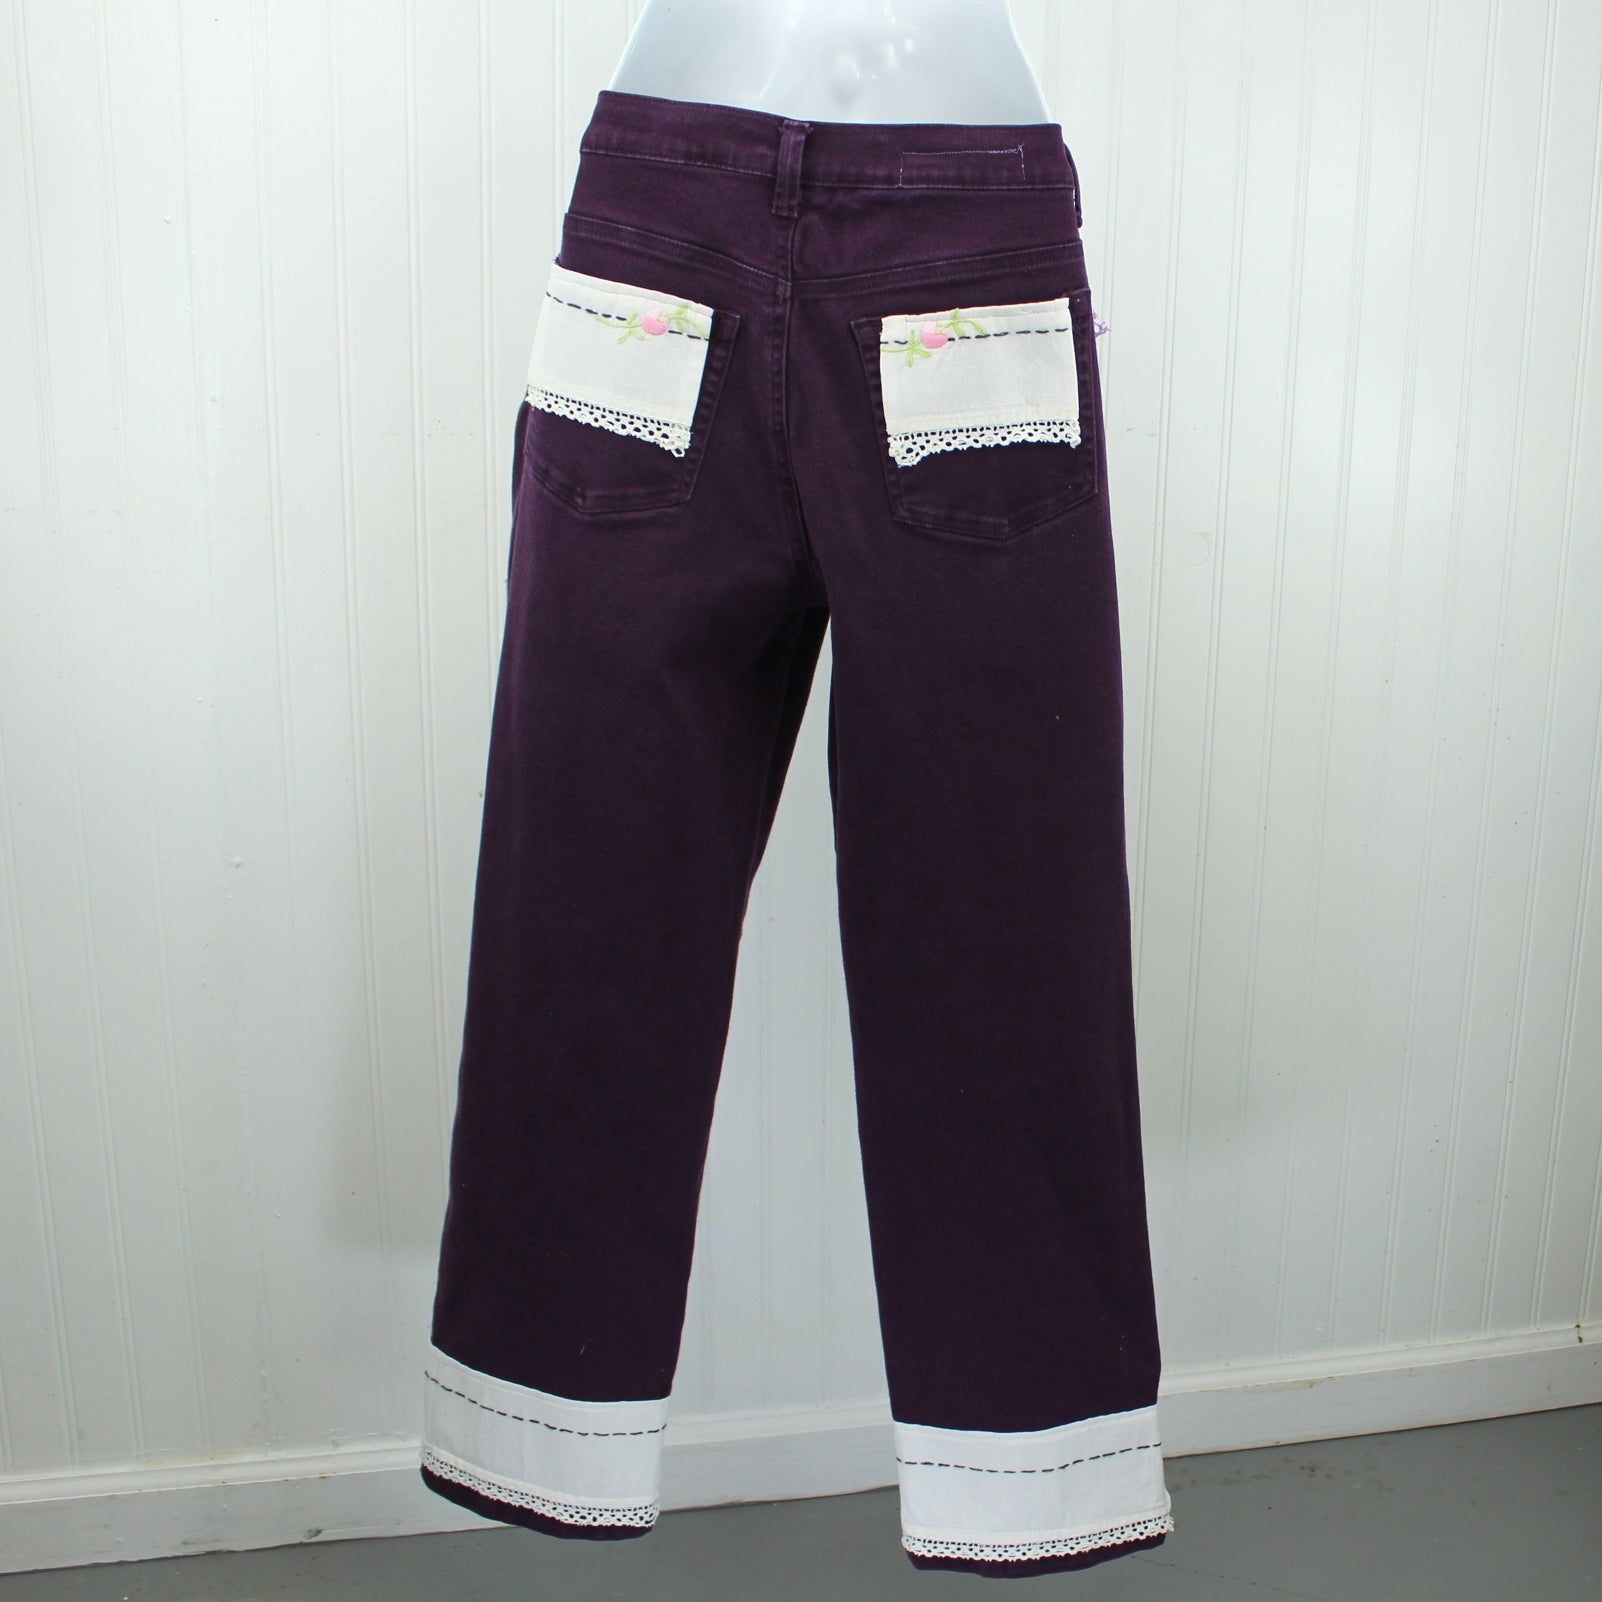 Gloria Vanderbilt Purple Jeans Patzi Design Embroidery Flower Basket Size 8 Short decorated back pockets and leg hems with embroidery lace